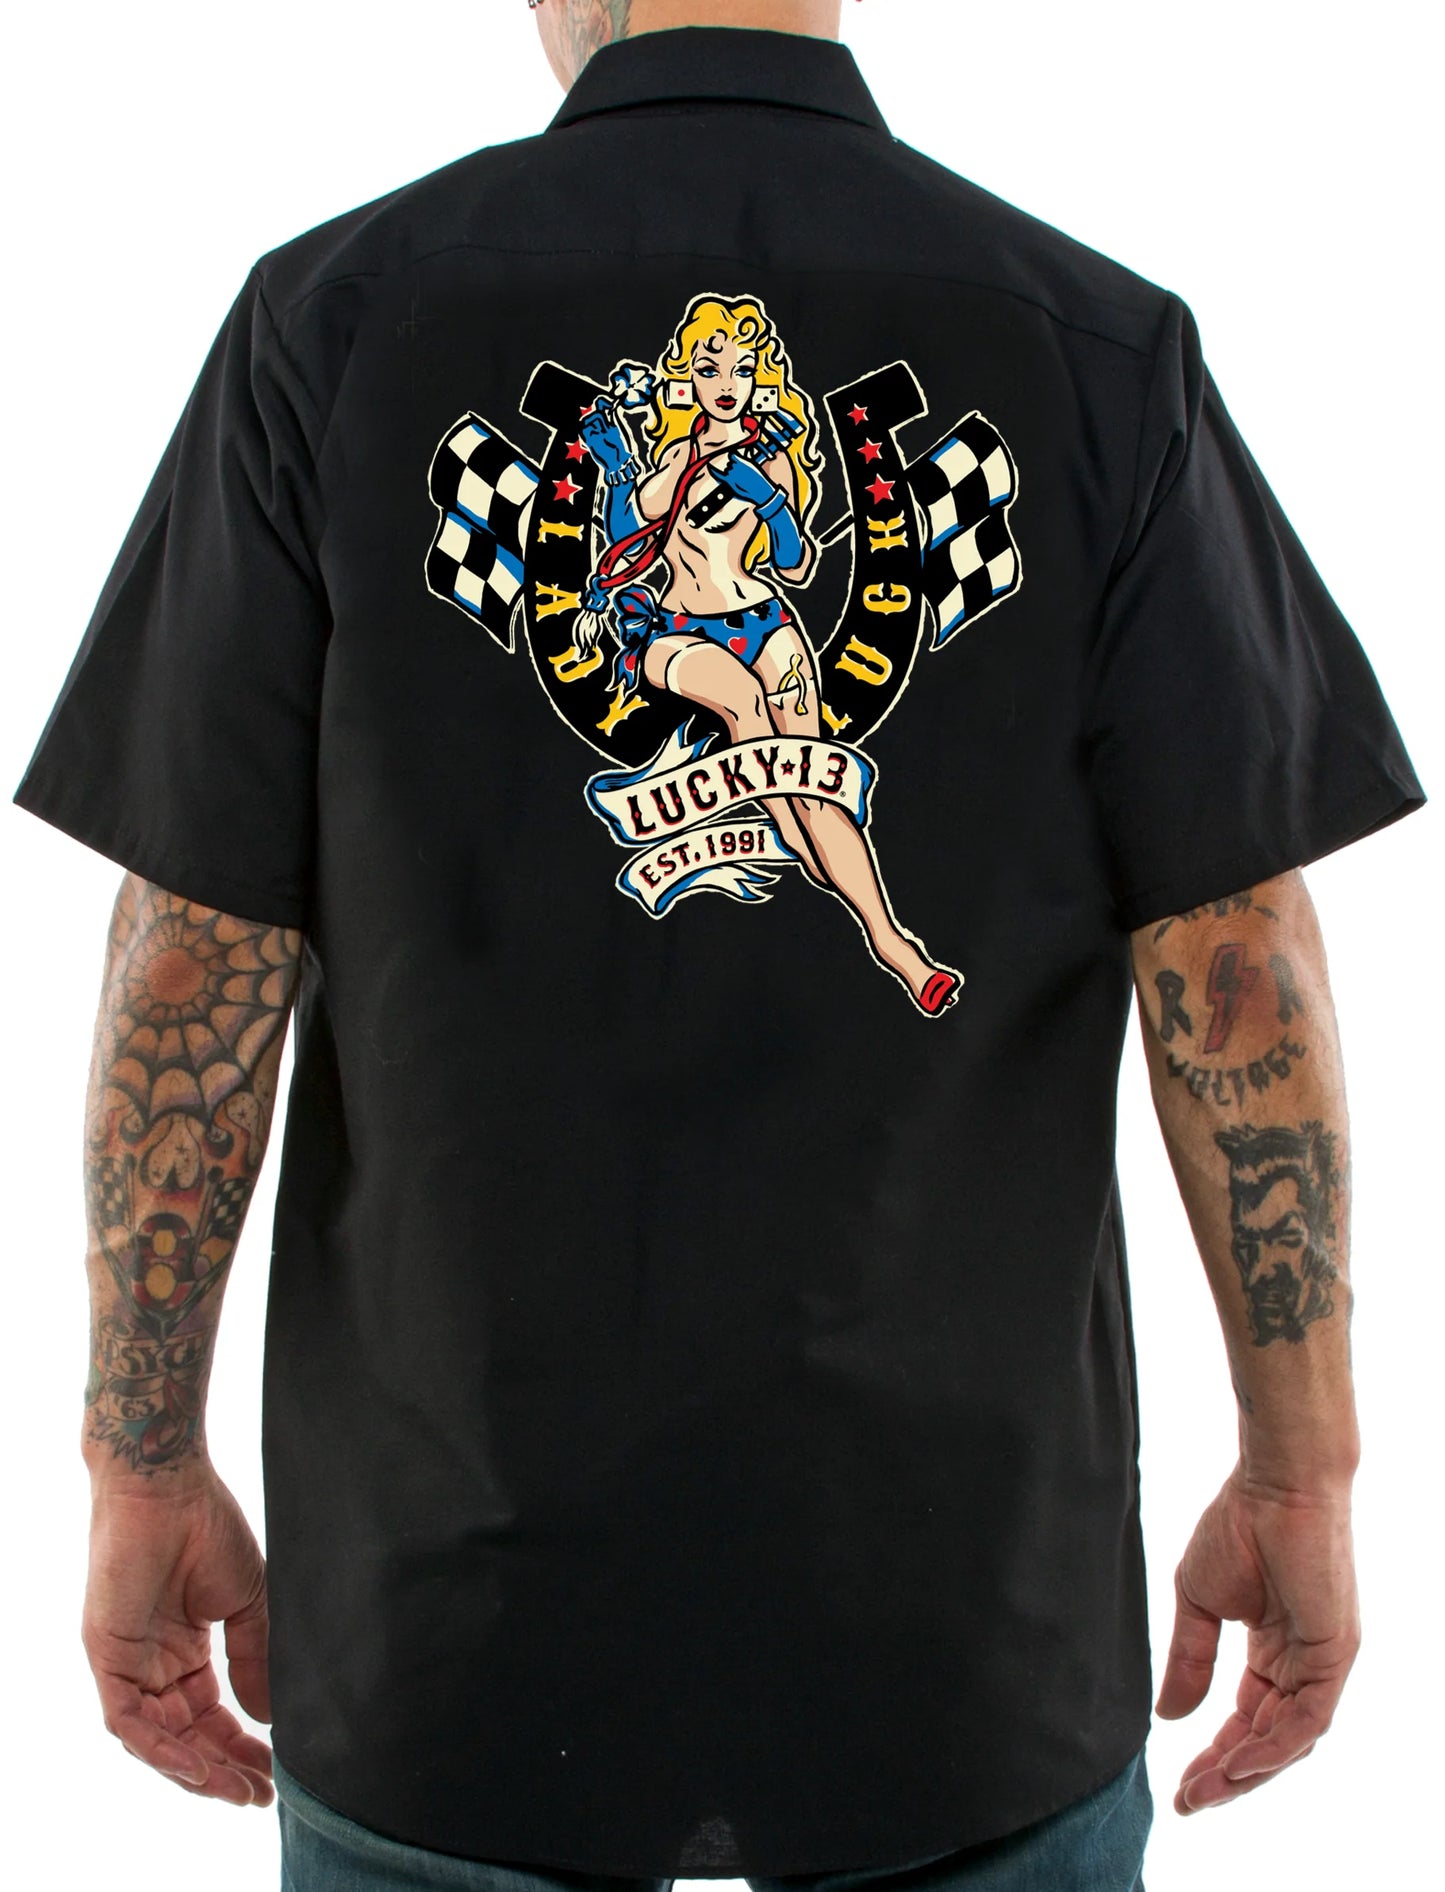 The LADY LUCK Shirt